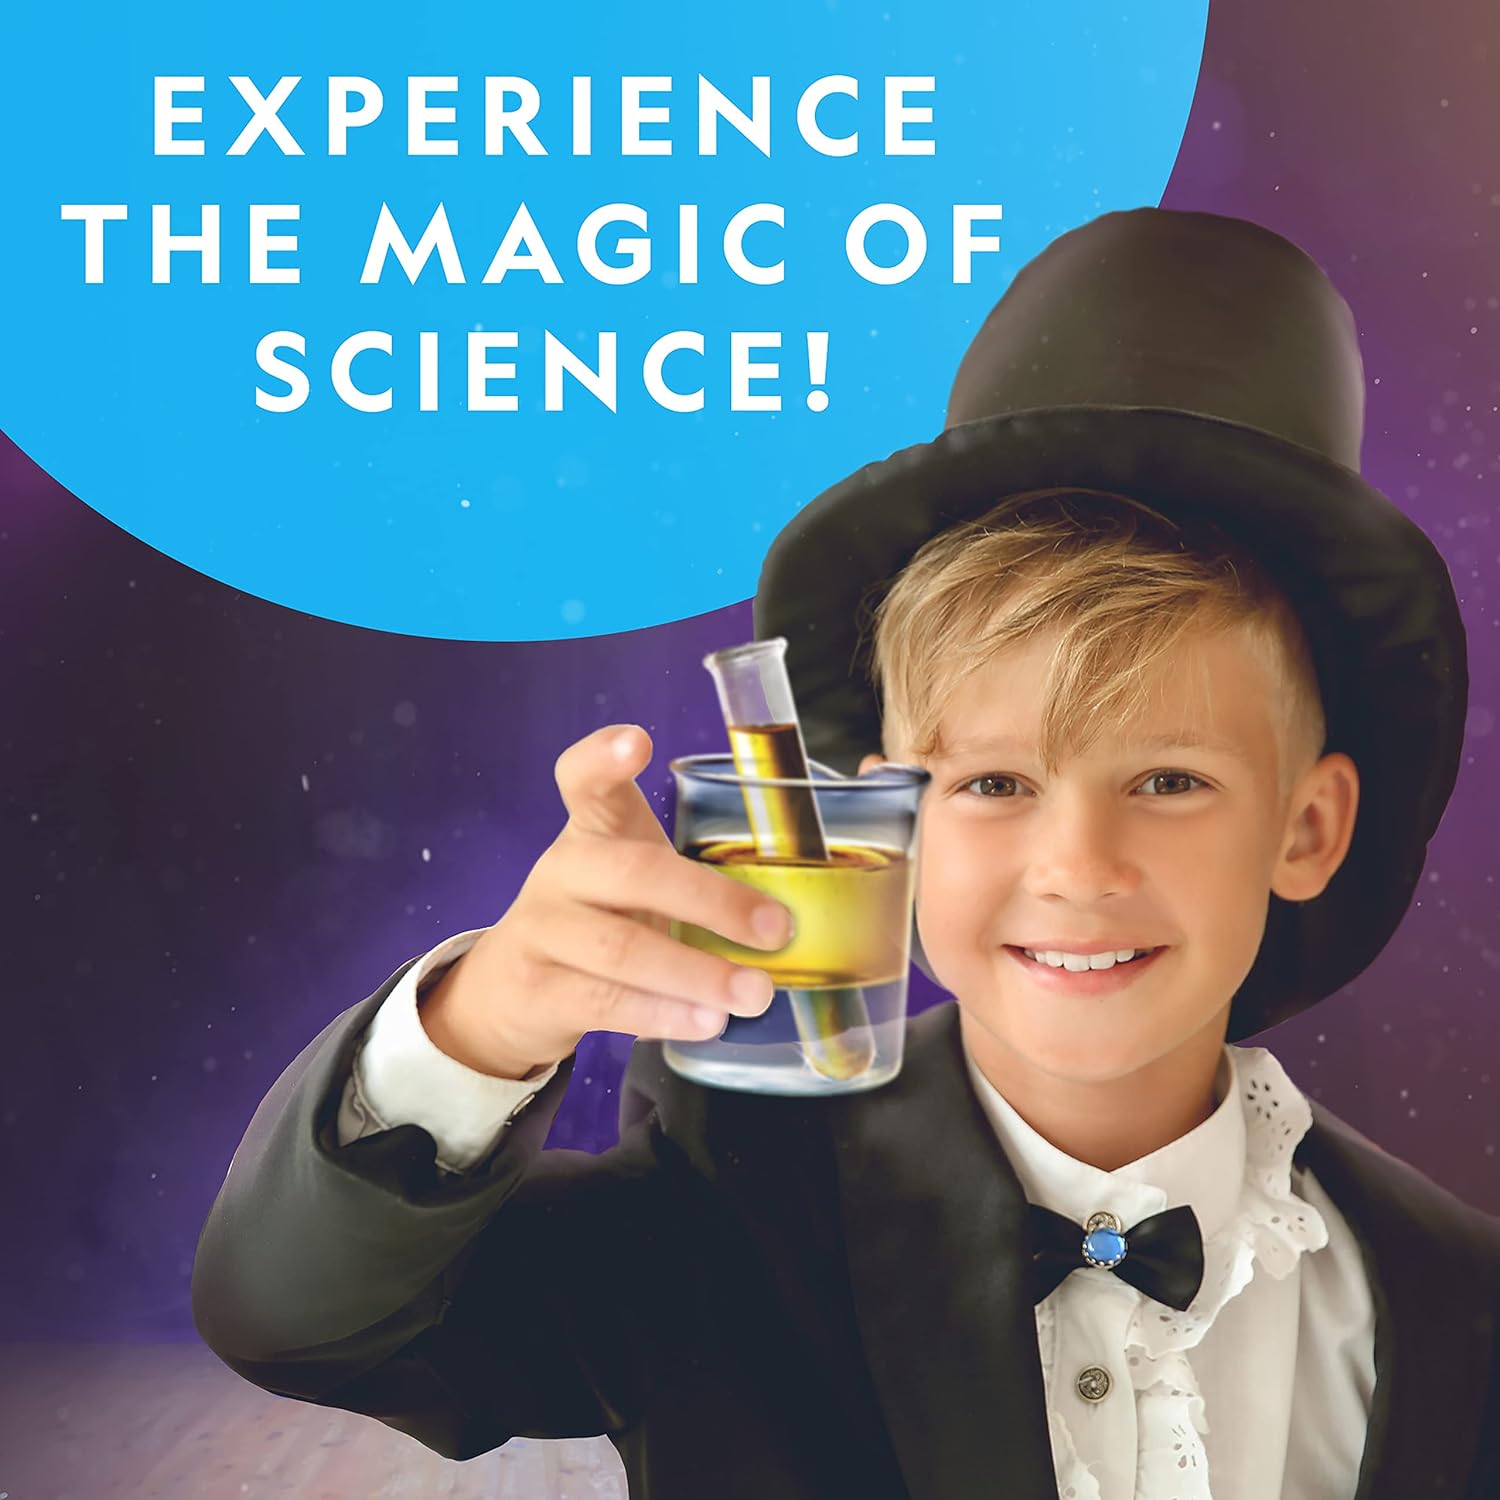 NATIONAL GEOGRAPHIC Science Magic Kit – Science Kit for Kids with 50 Unique Experiments and Magic Tricks, Chemistry Set and STEM Project, A Great Gift for Boys and Girls (Amazon Exclusive) : Toys Games